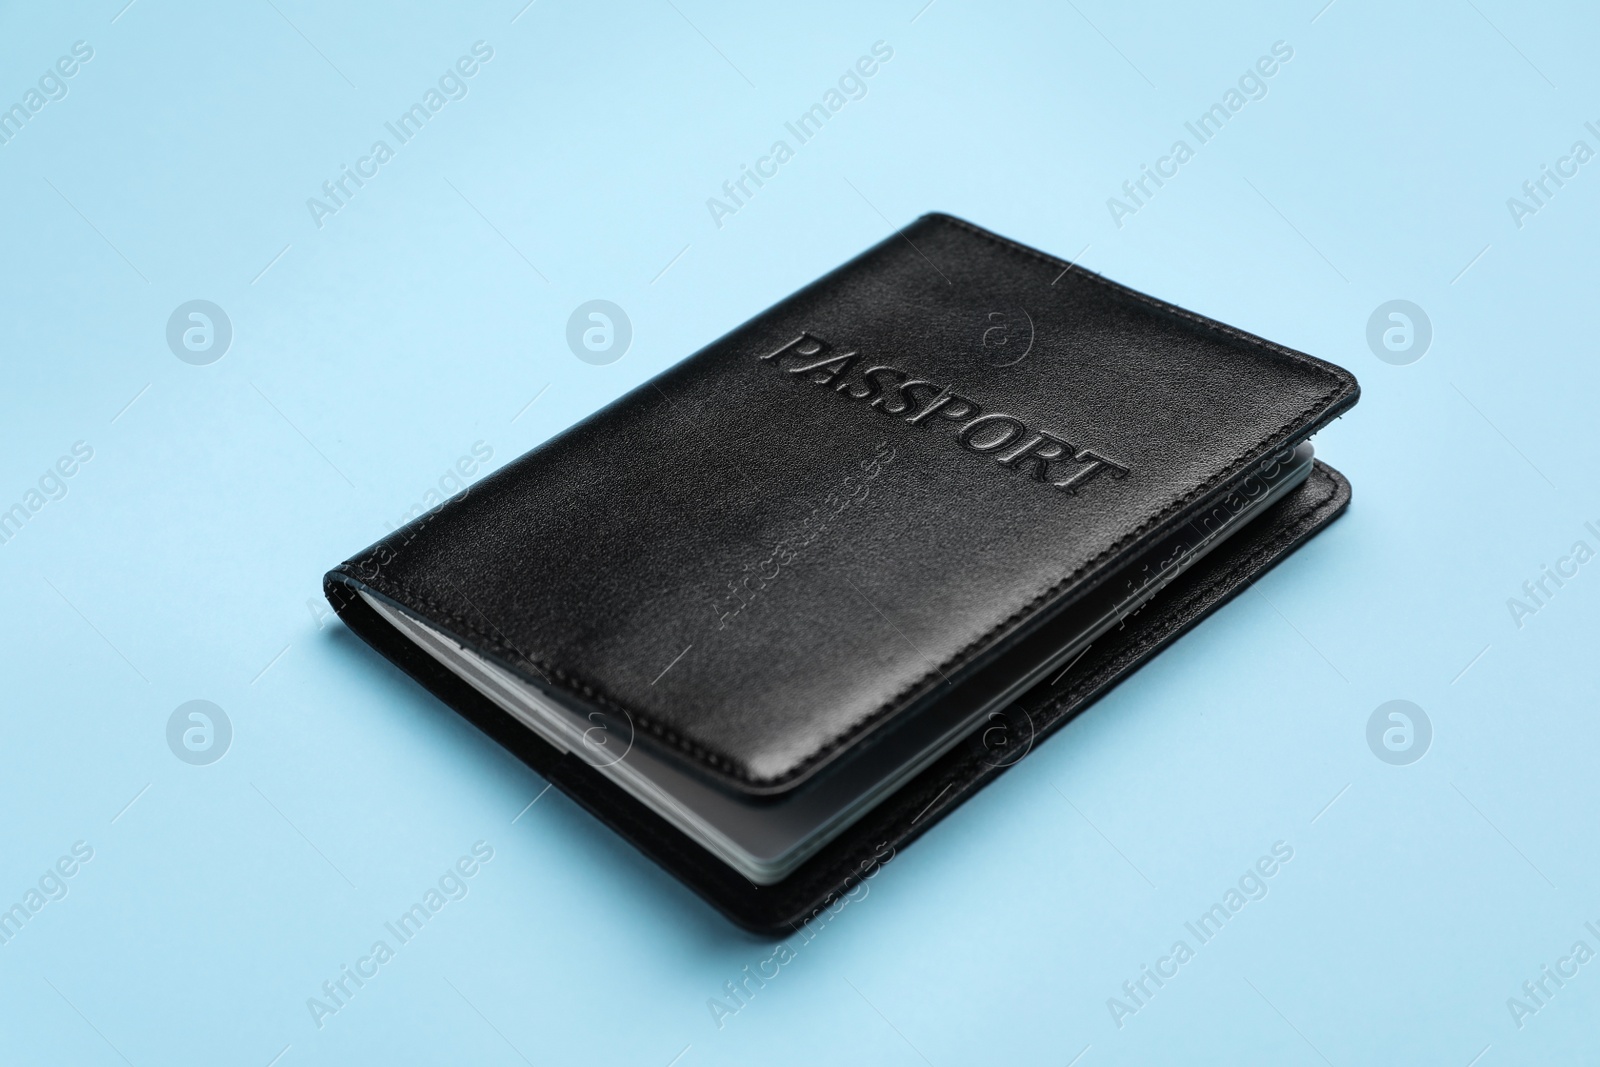 Photo of Passport in black leather case on light blue background